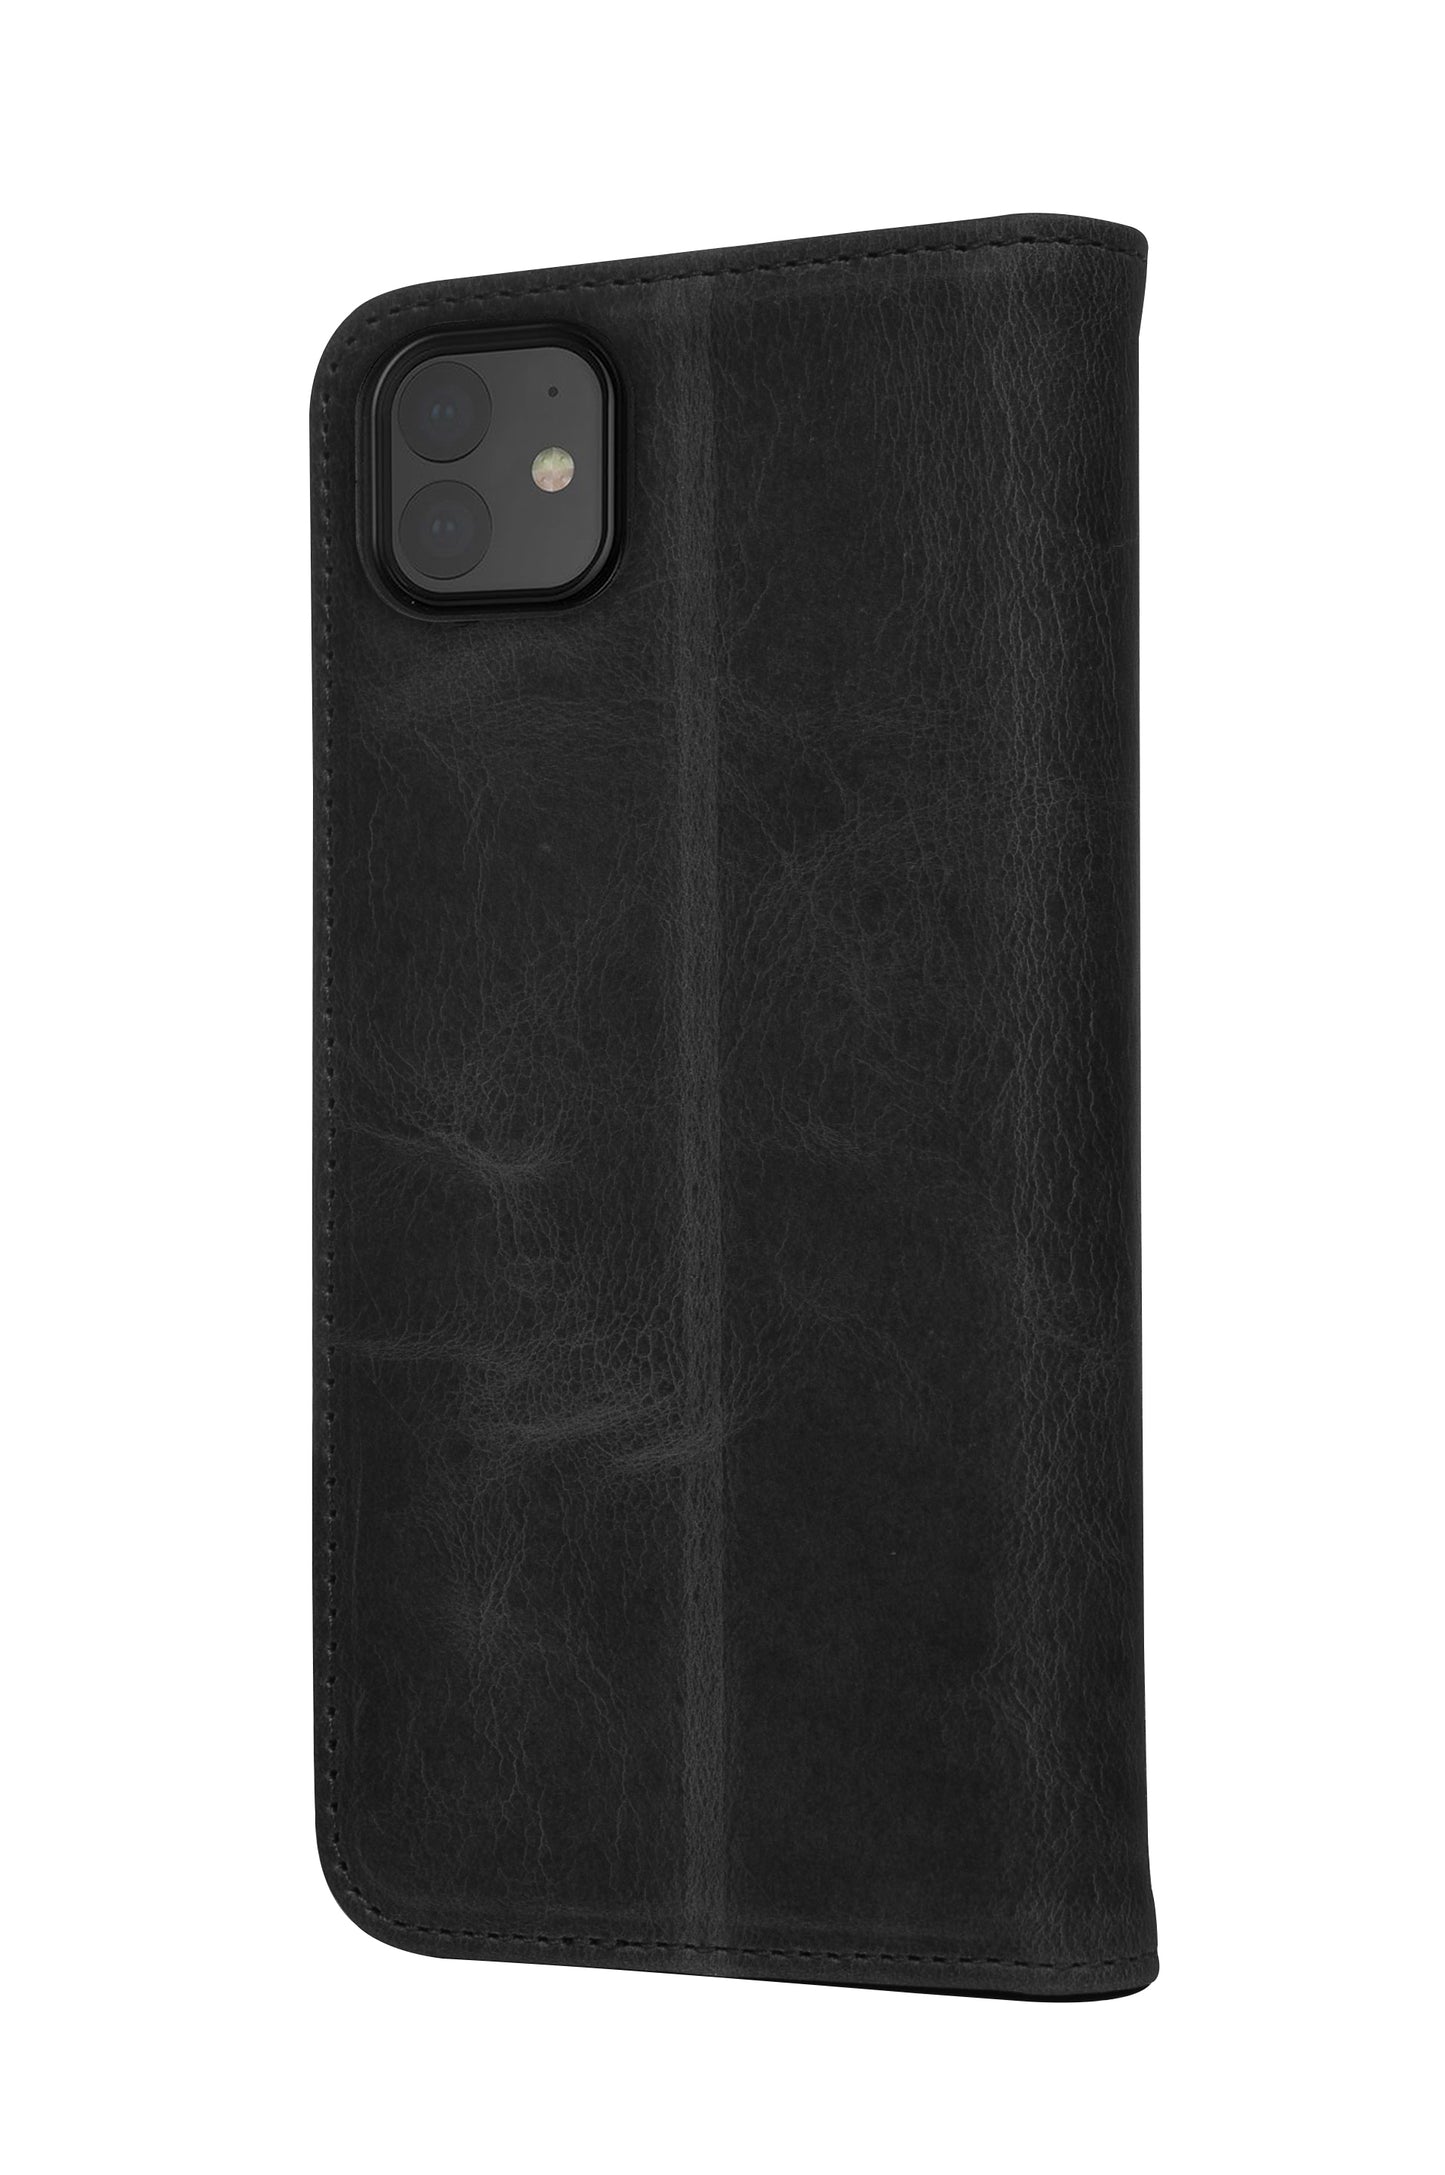 iPhone 12 Leather Case. Premium Slim Genuine Leather Stand Case/Cover/Wallet (Black)